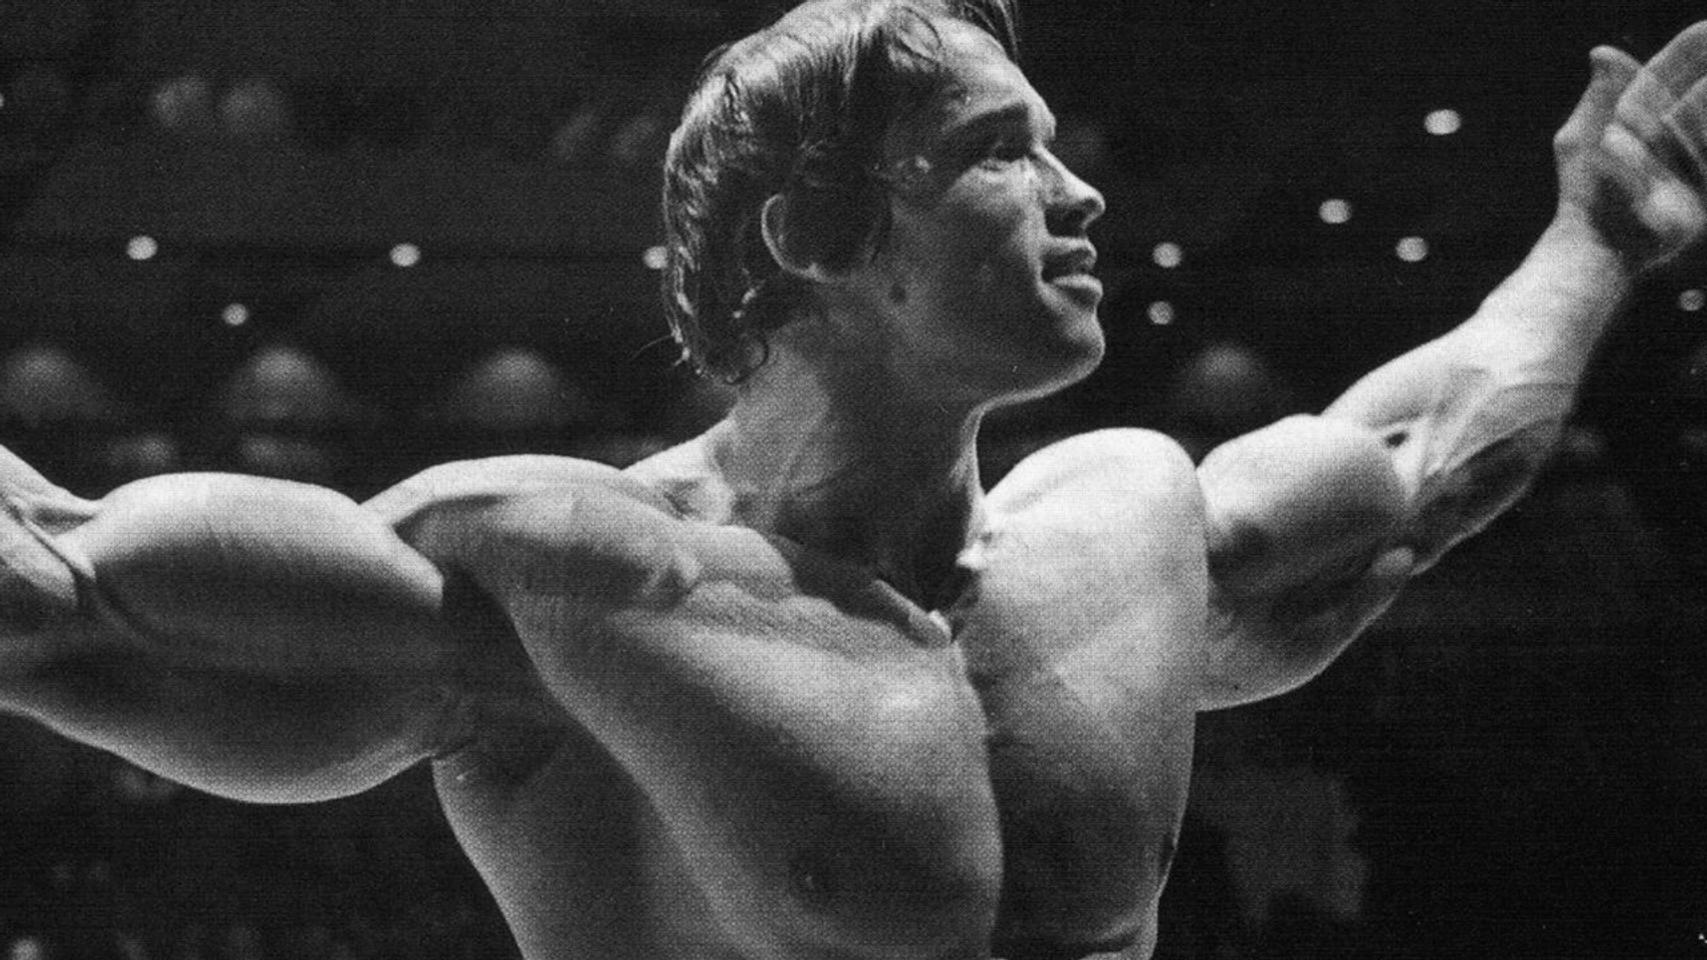 5 Things We Can Learn From Arnold About Building Muscle